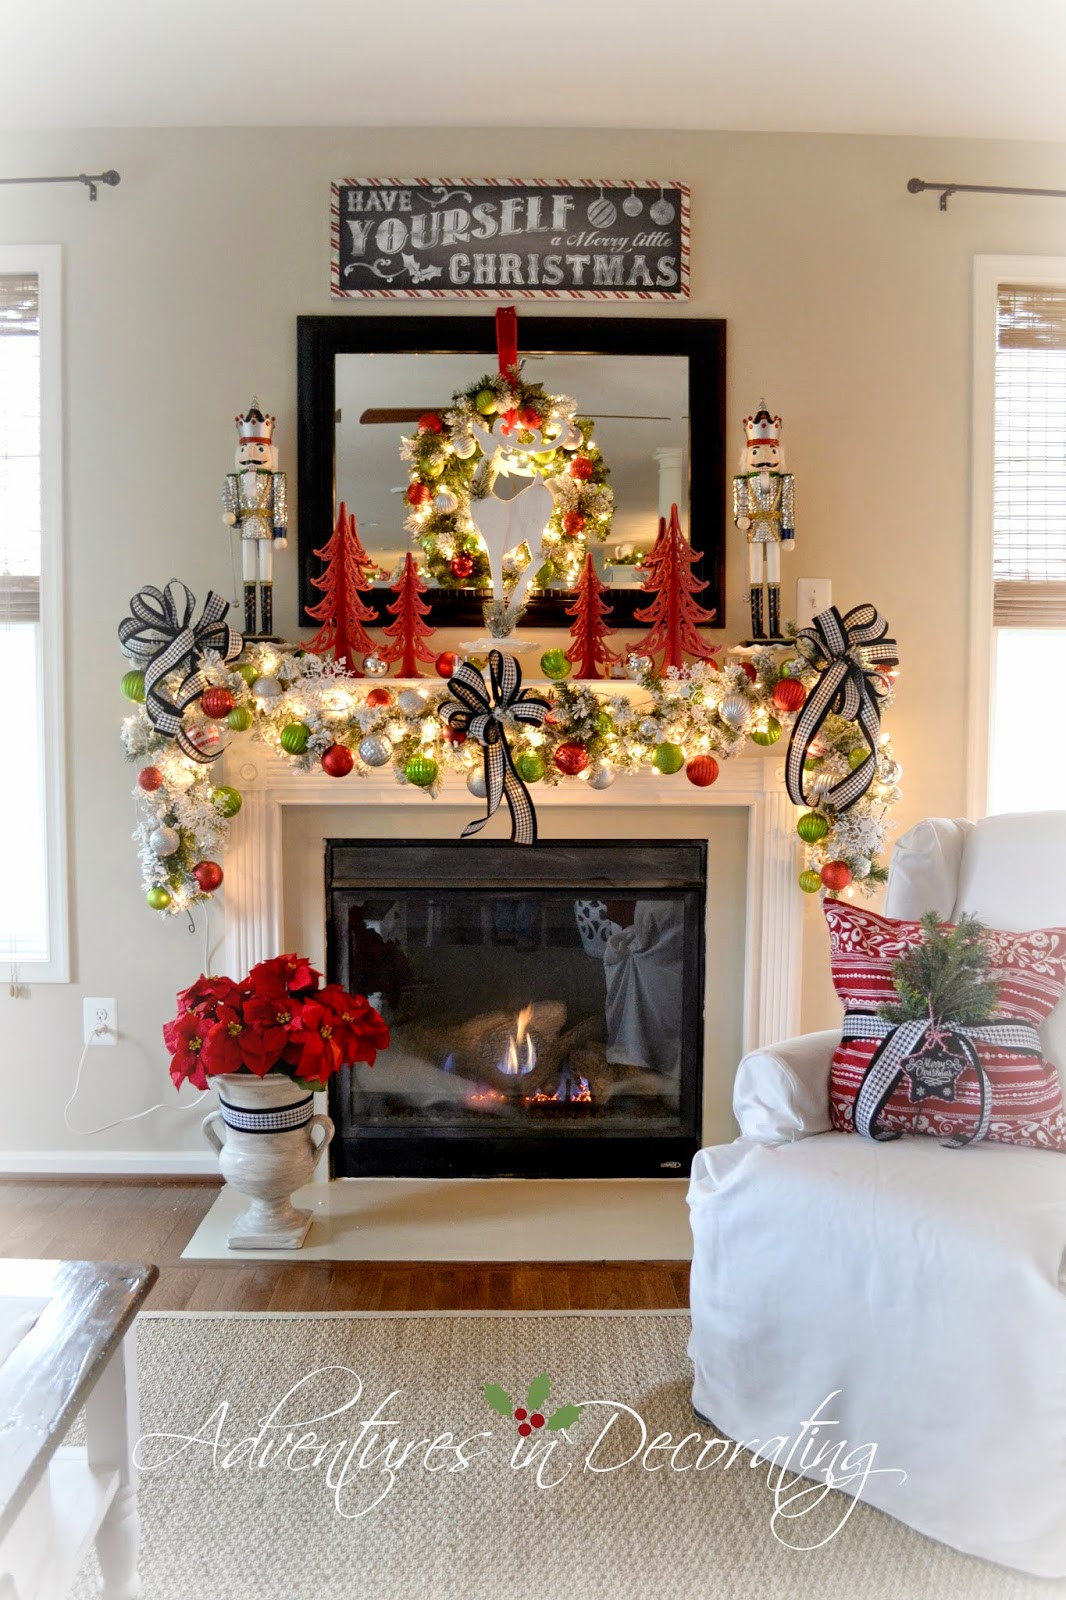 Christmas Fireplace Decor
 Adventures in Decorating Our 2014 Christmas Mantel and